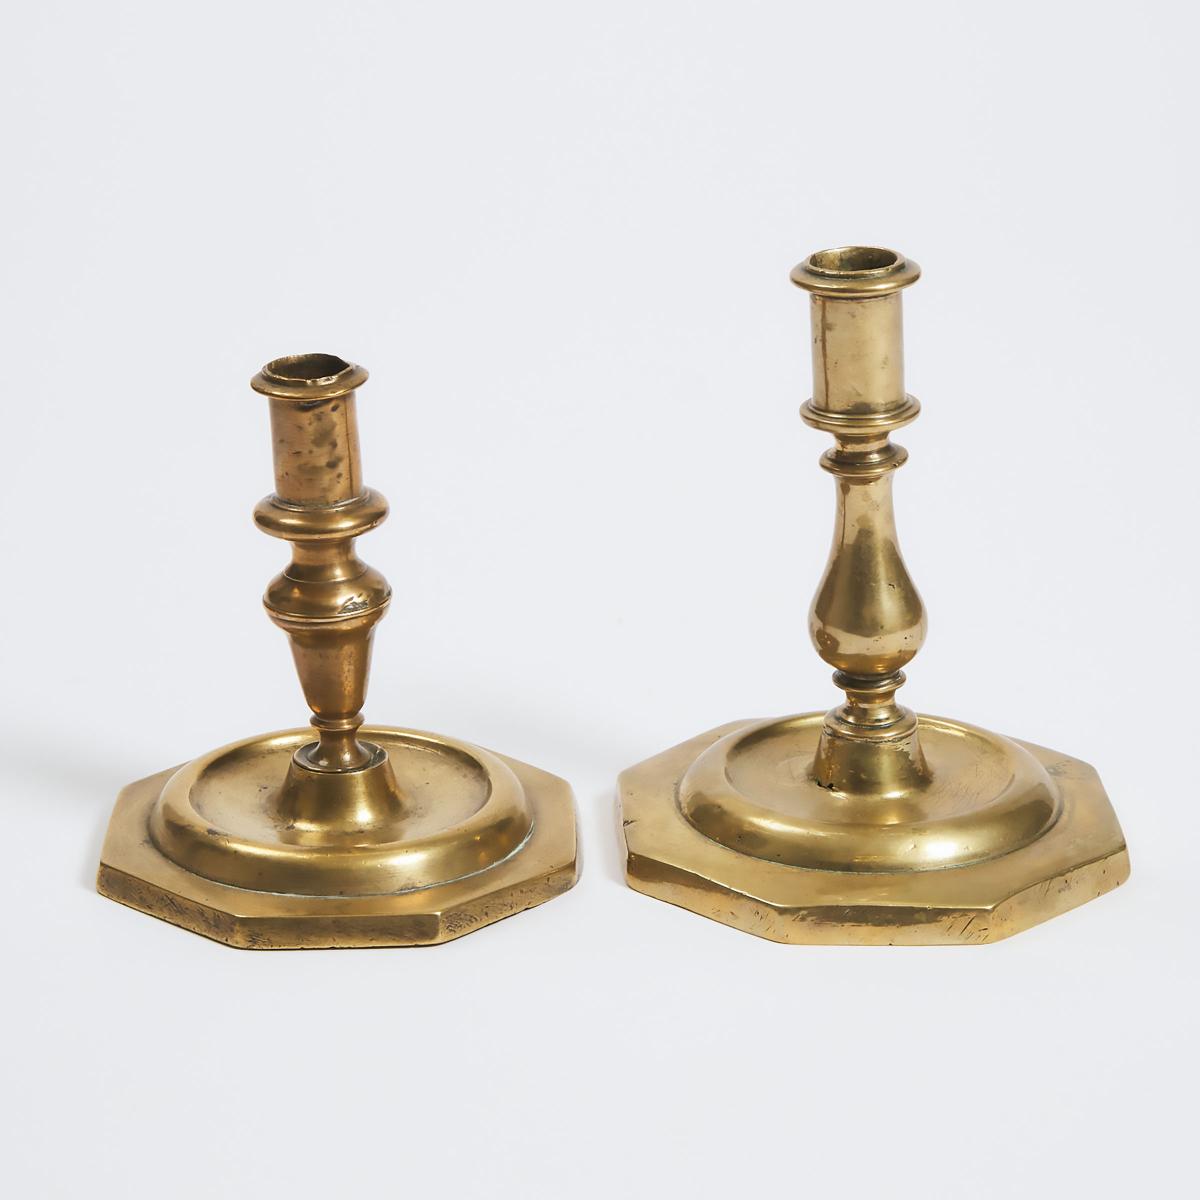 Two Brass Candlesticks, mid-late 17th century